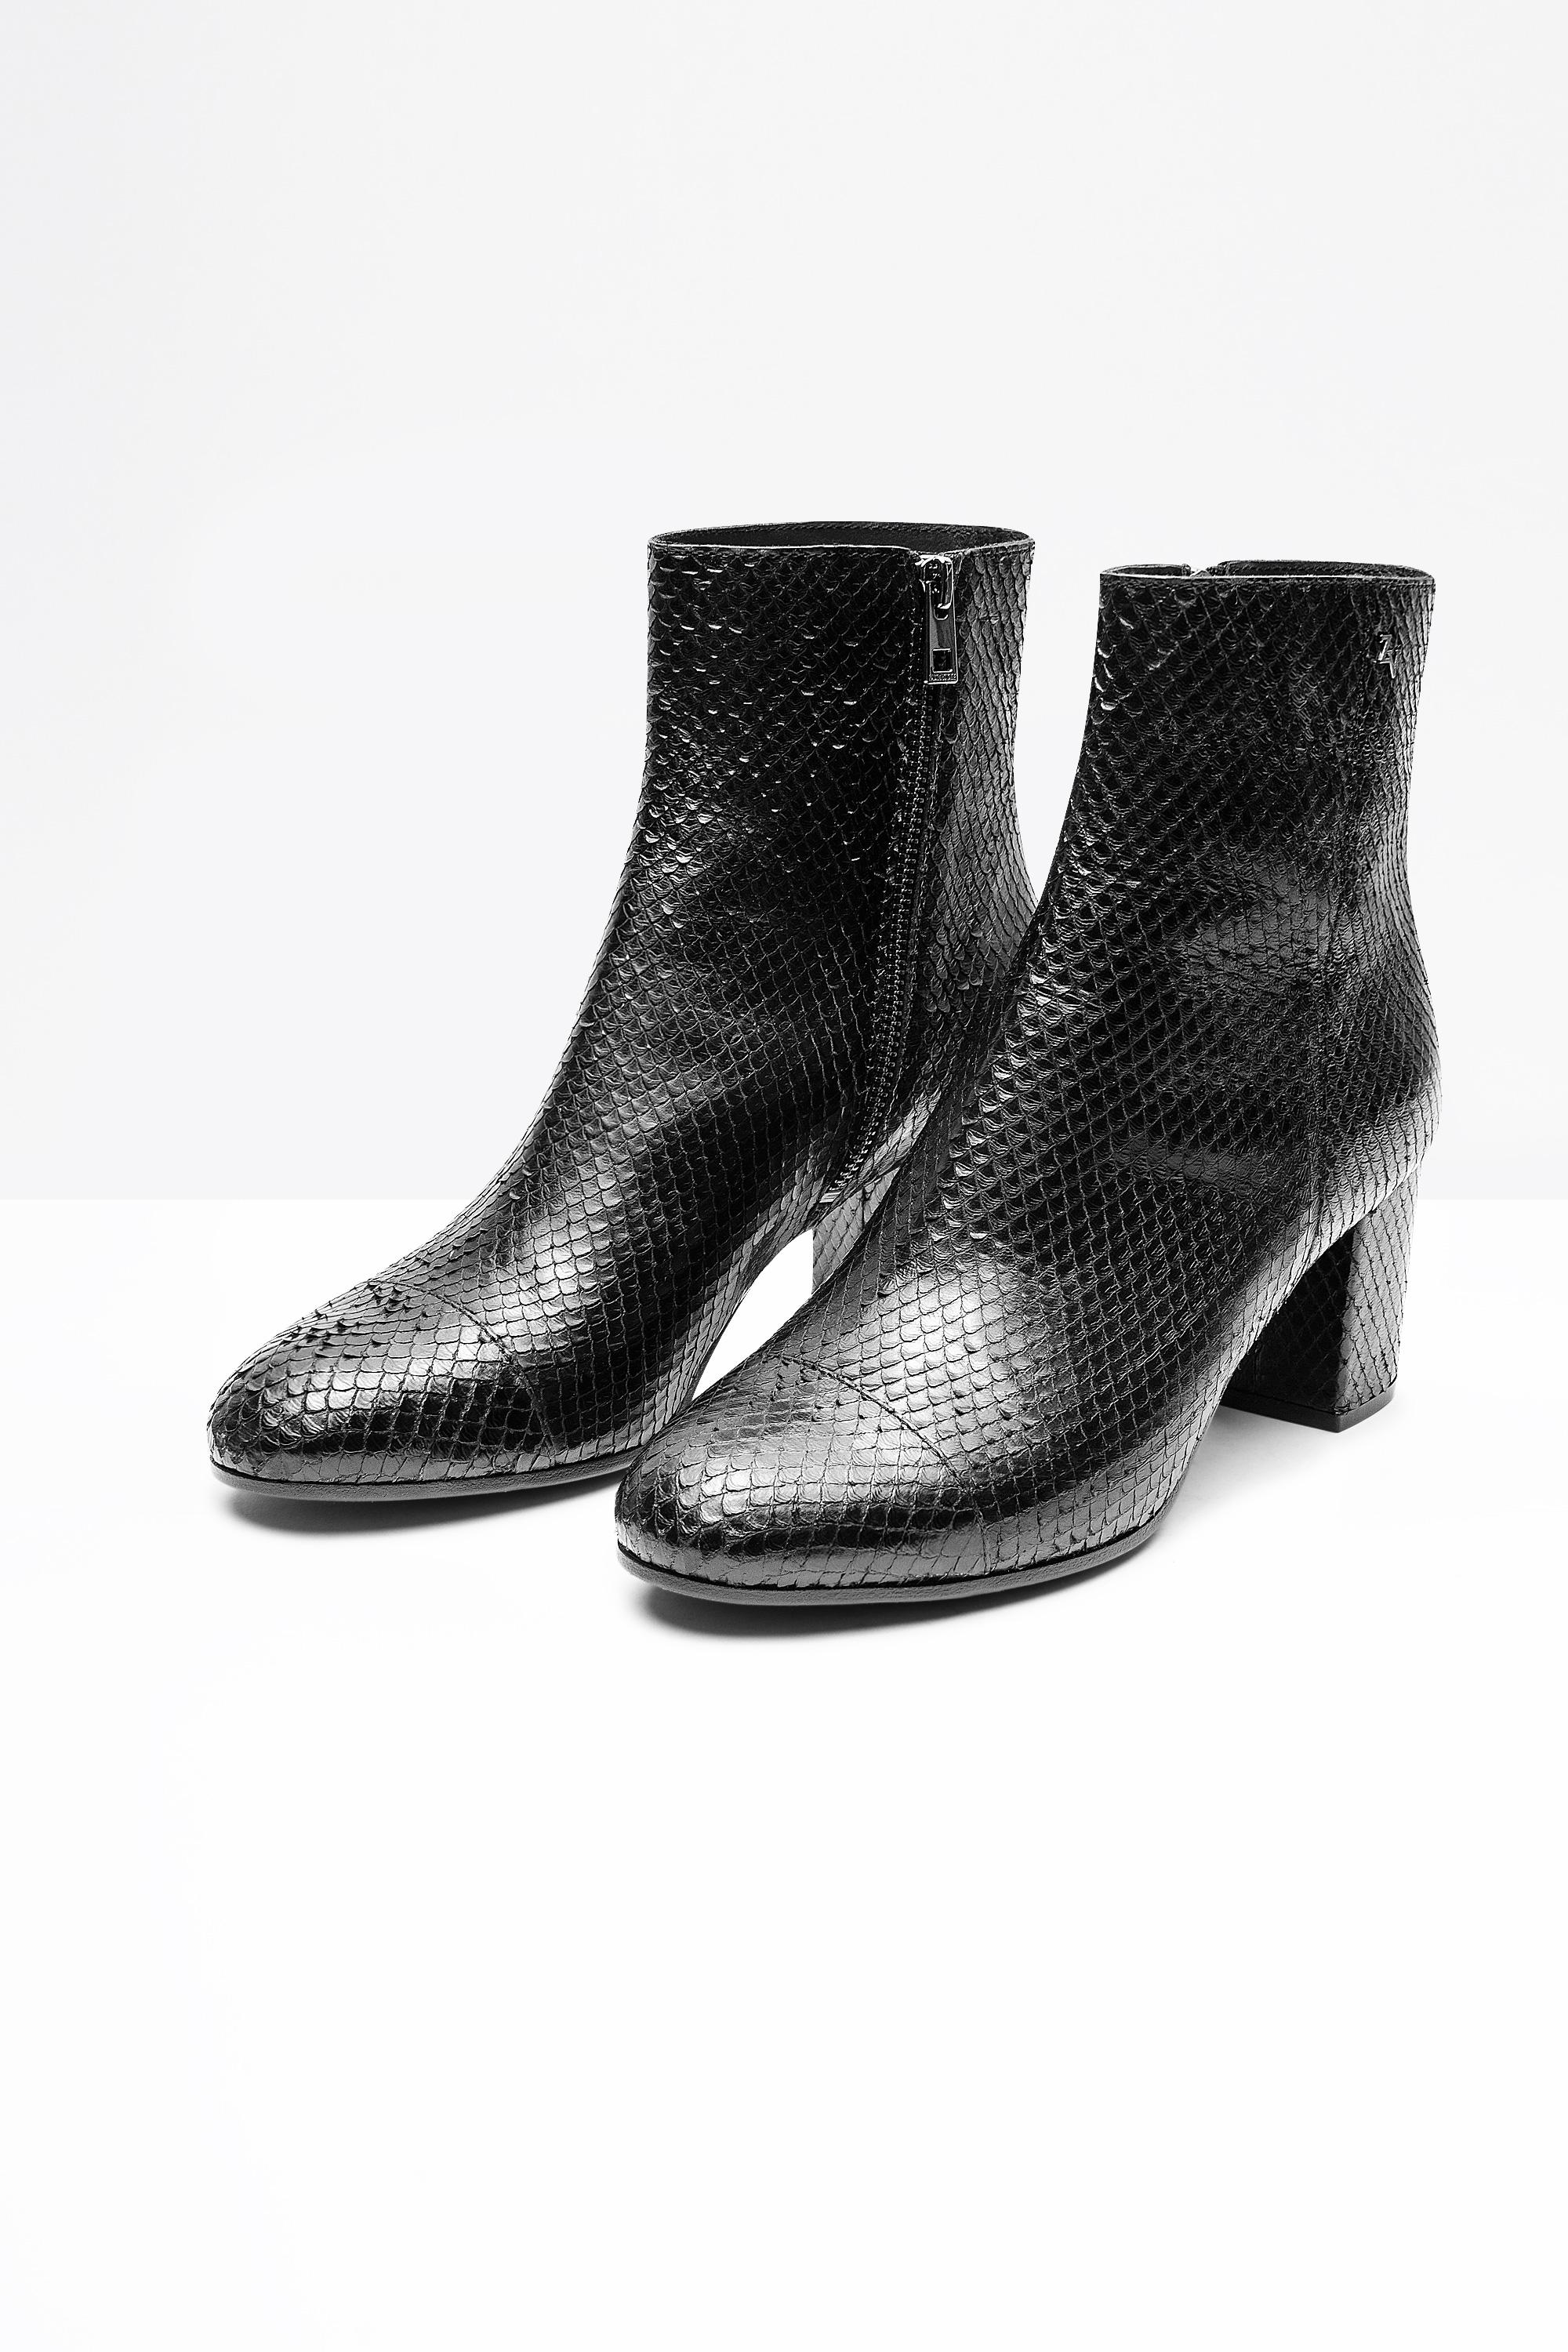 Zadig & Voltaire Leather Lena Keith Boots in Black - Lyst